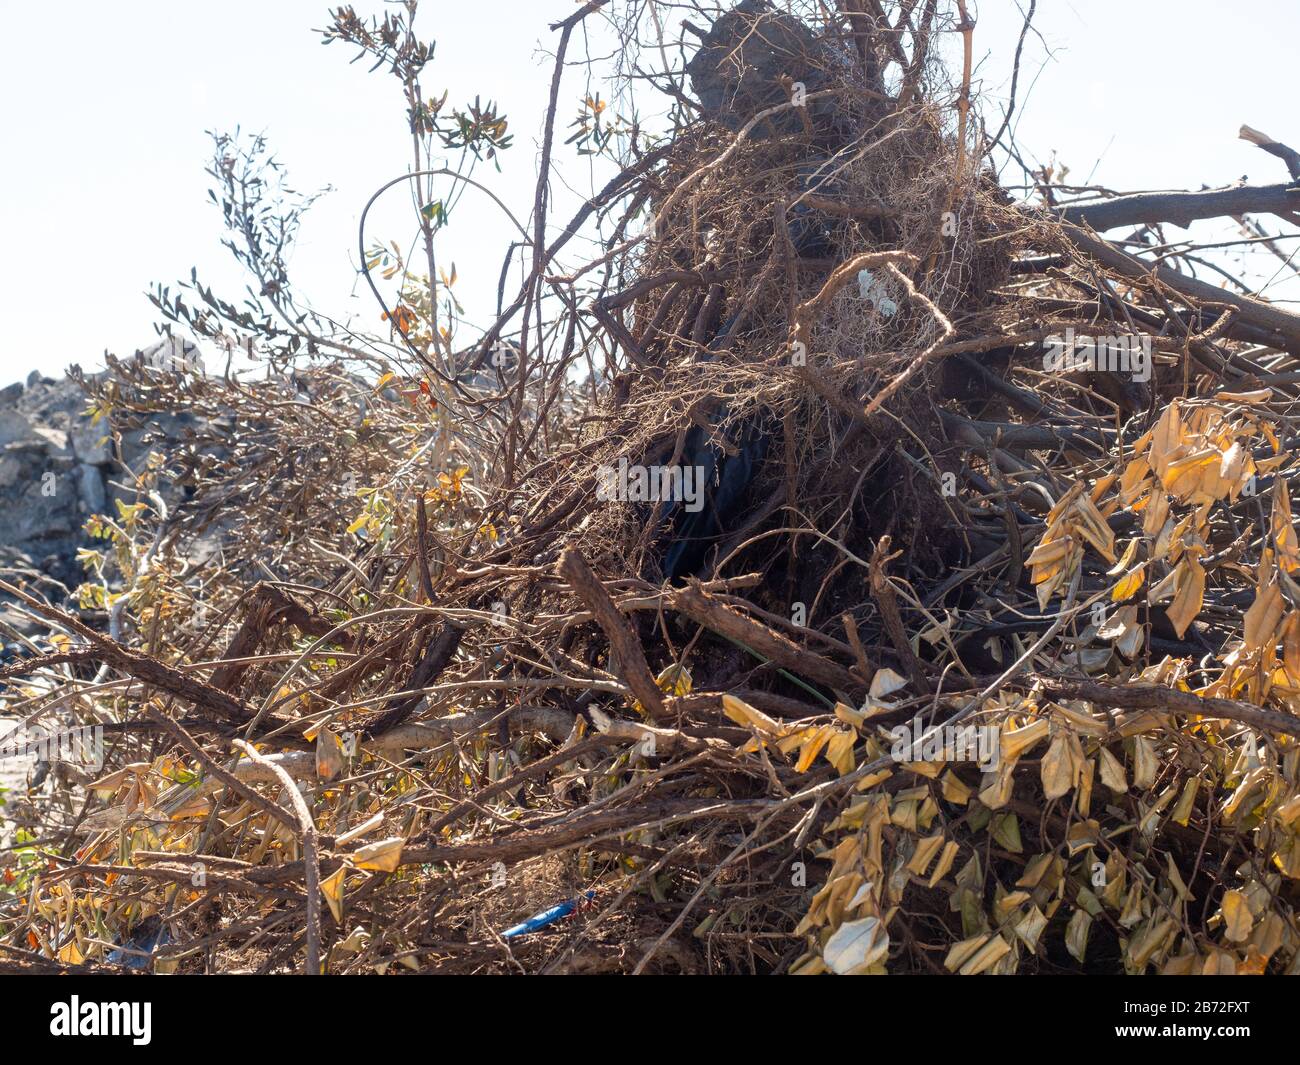 Huge Pile of Dead Trees and Shrubs at Road Demolition Site, Rubble, Vegetation Debris View #3 close-up view of Trees, Branches, Leaves, Roots Stock Photo